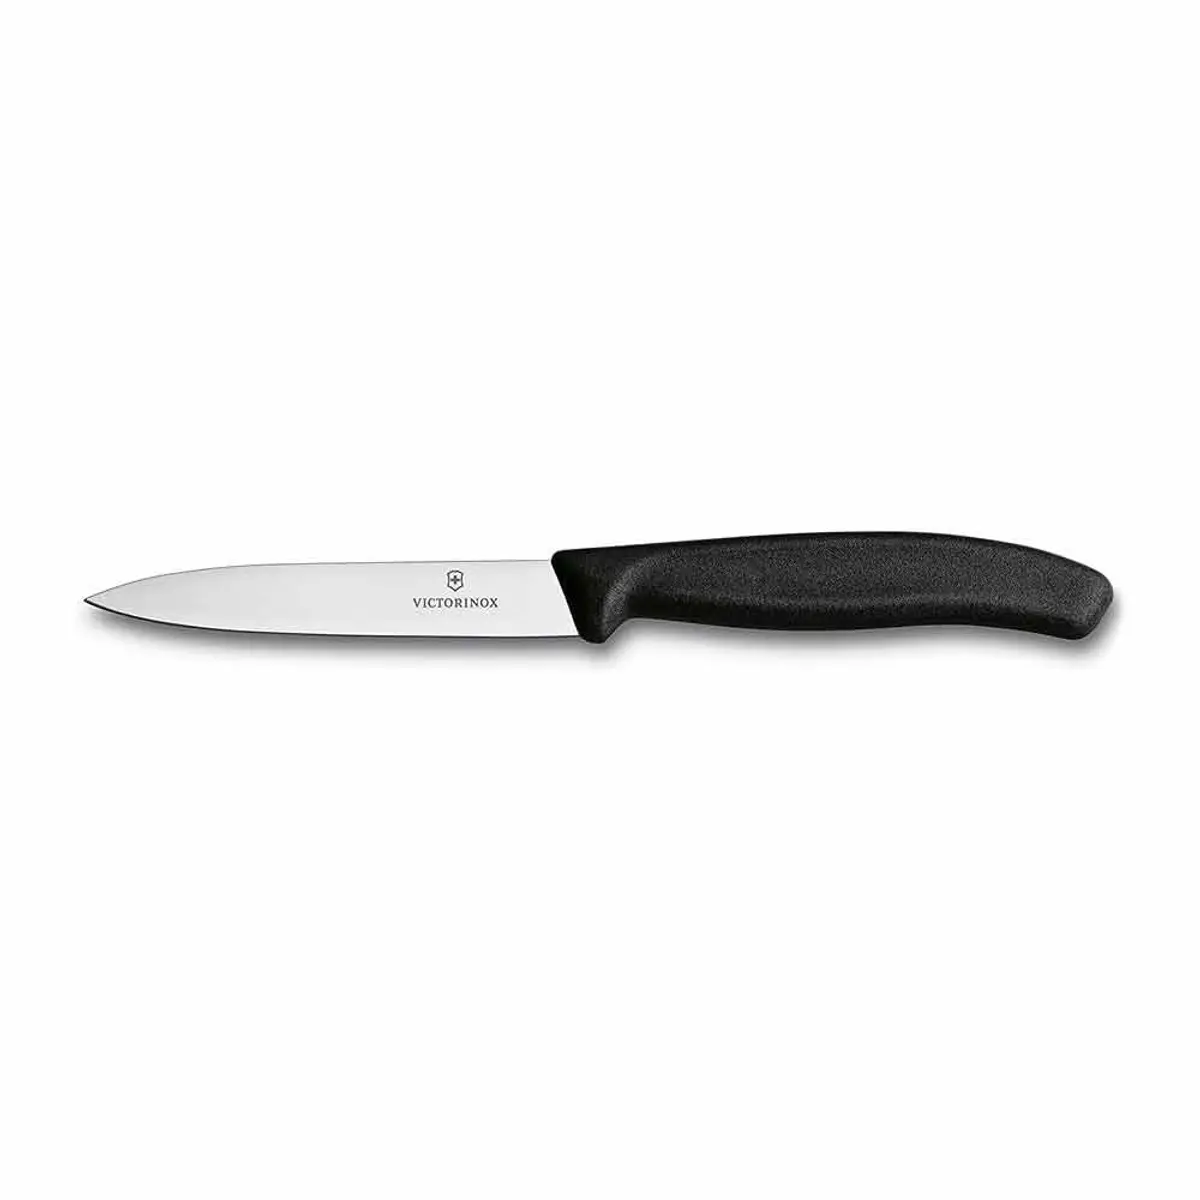 Victorinox 4-Inch Swiss Classic Paring Knife with Straight Blade